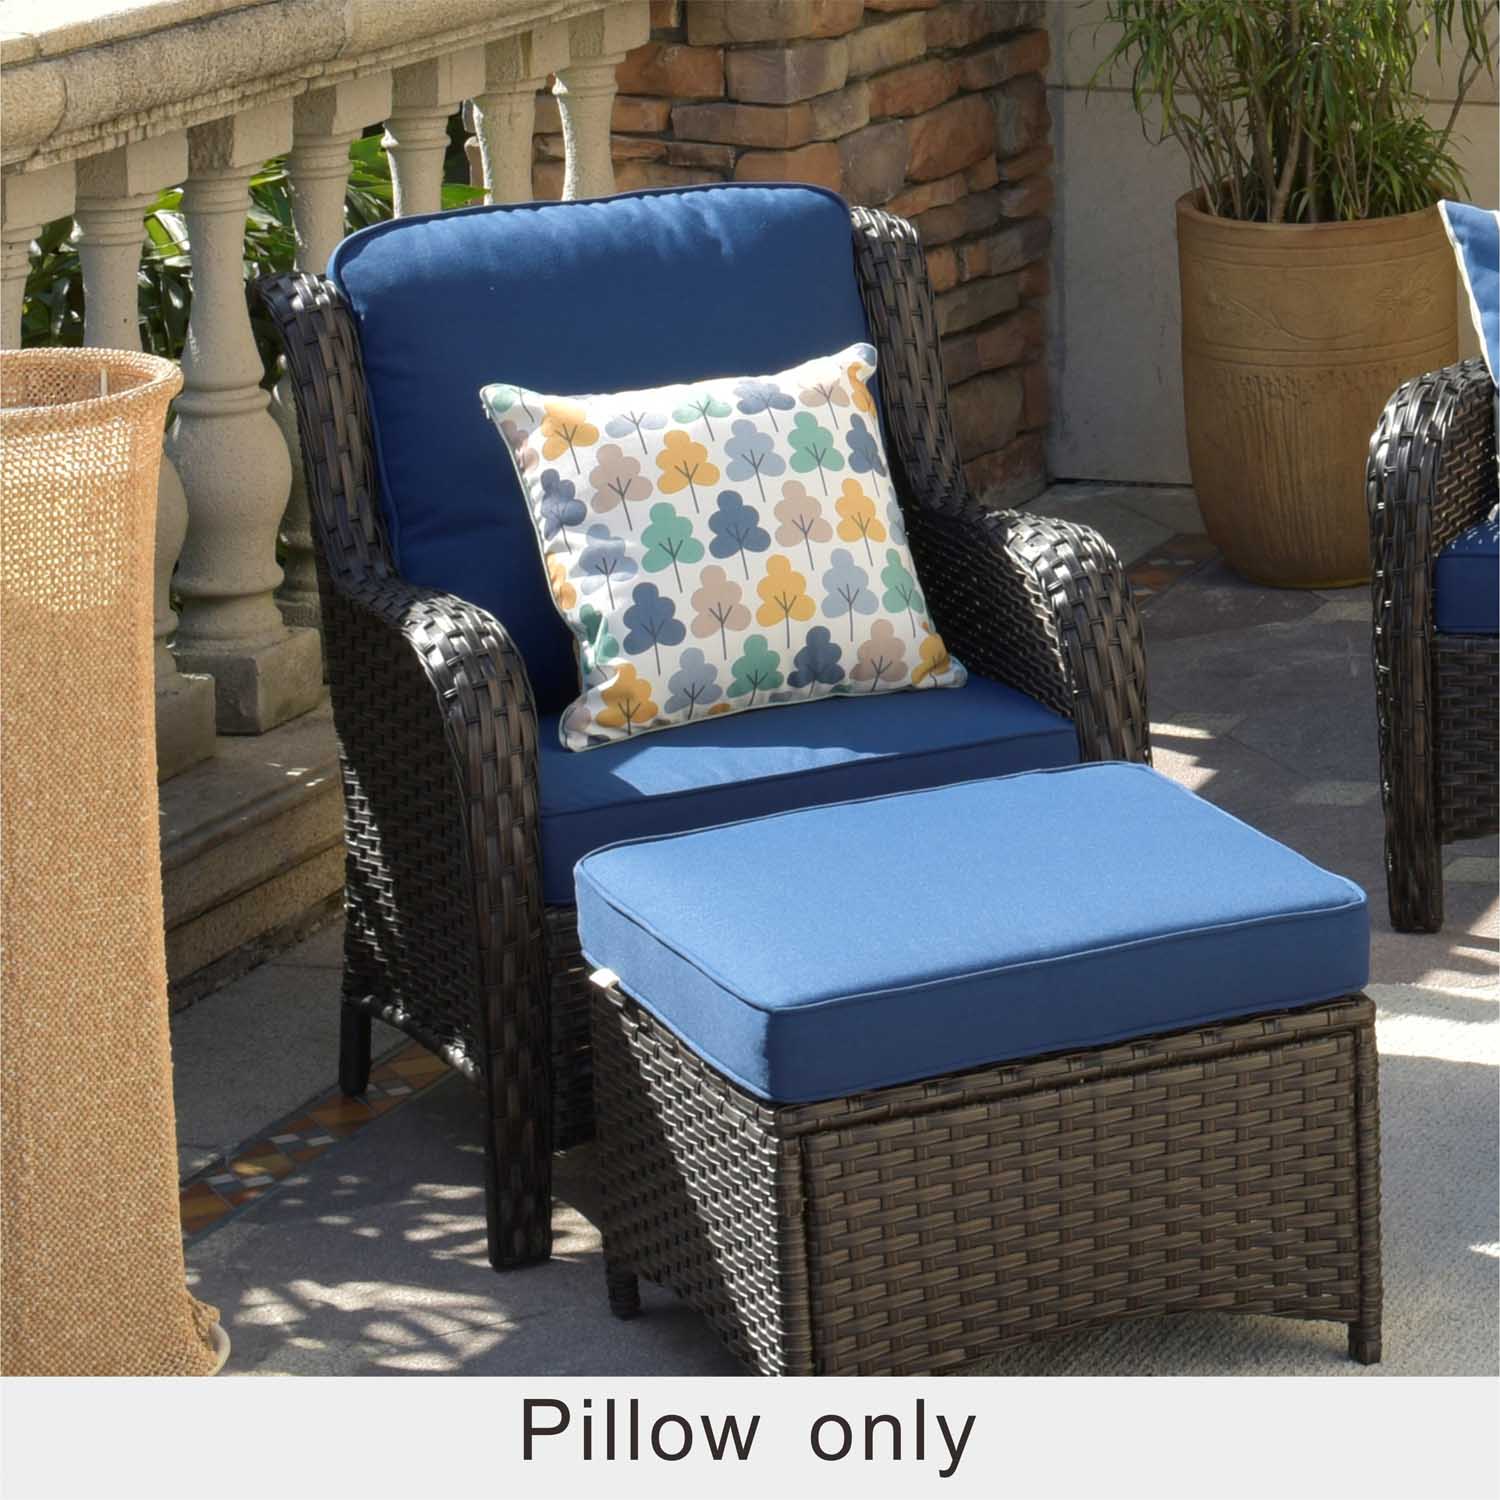 Ovios Indoor Outdoor Throw Pillows Set of 2 with Inserts Patio Furniture  Pillows Includes Pillow Core and Pillowcase, Decorative Pillows for Bed,  Couch, Sofa, Bench, Chair 